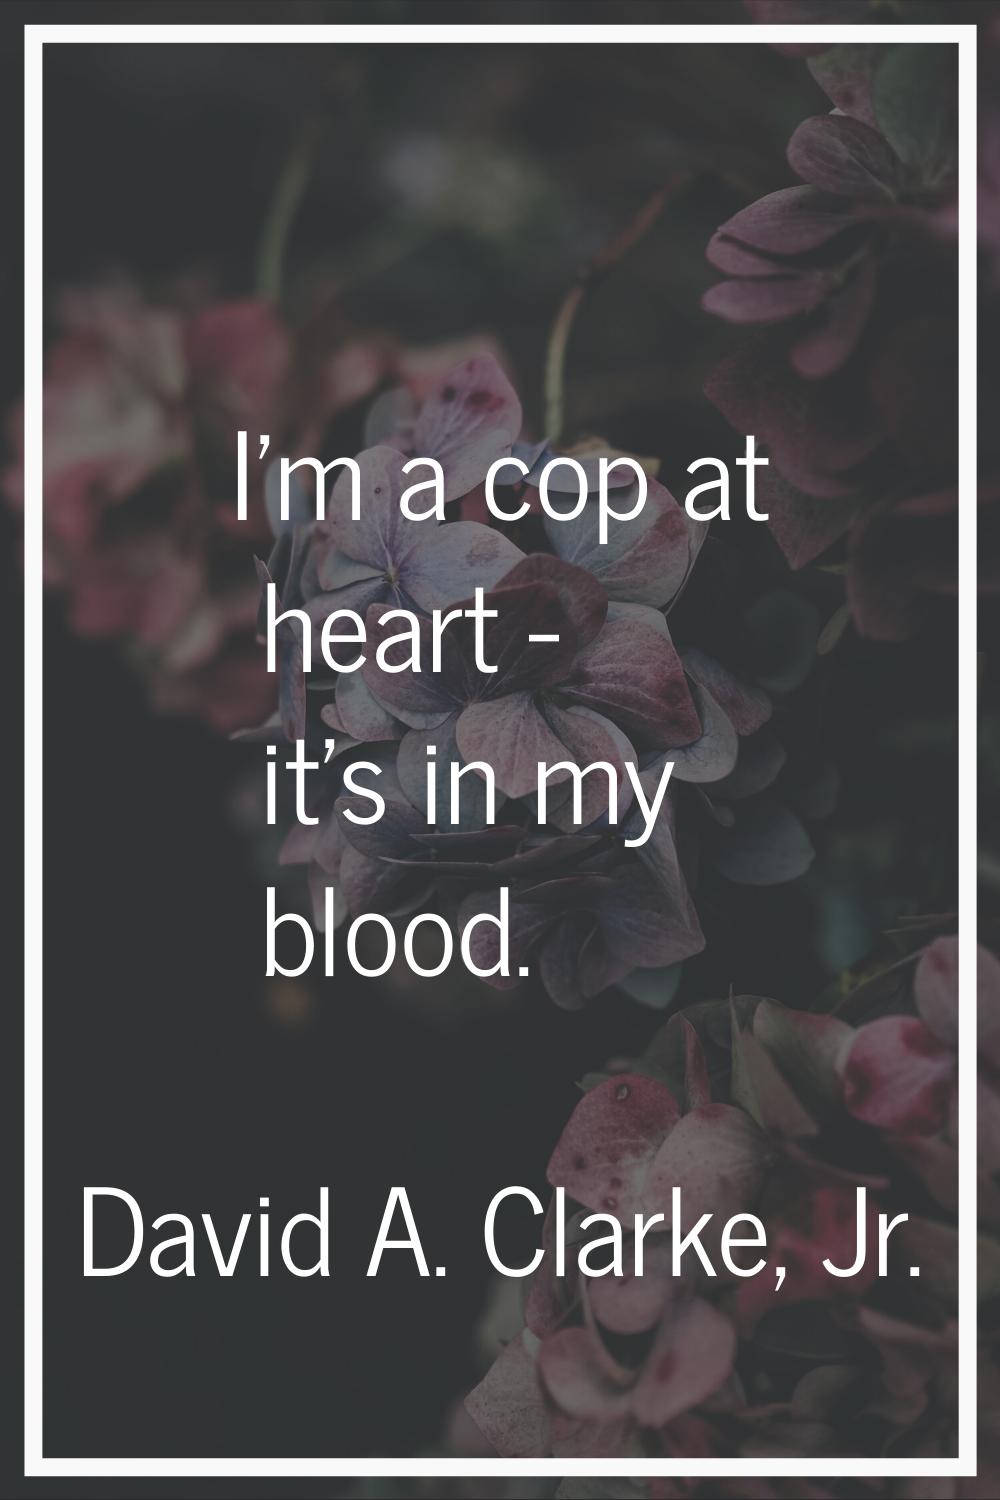 I'm a cop at heart - it's in my blood.